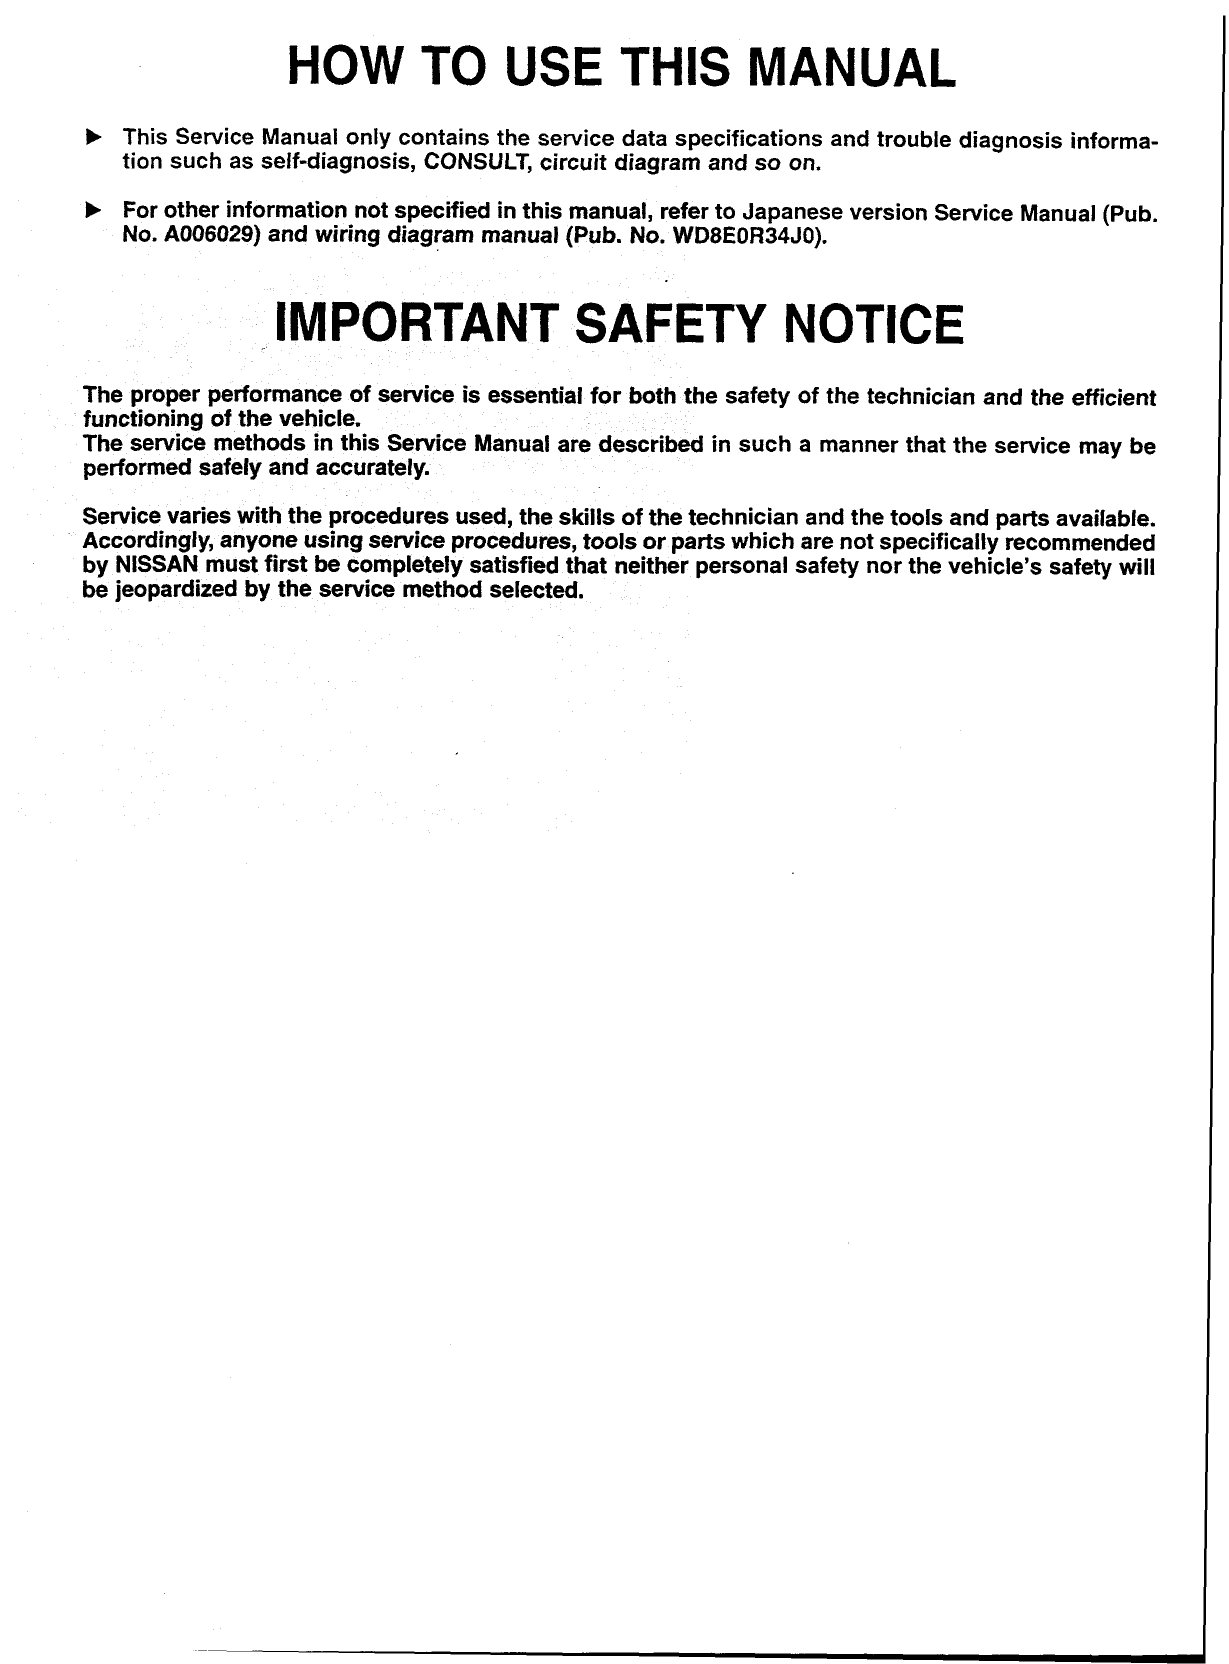 1998-2002 Nissan Skyline R34 service manual Preview image 3